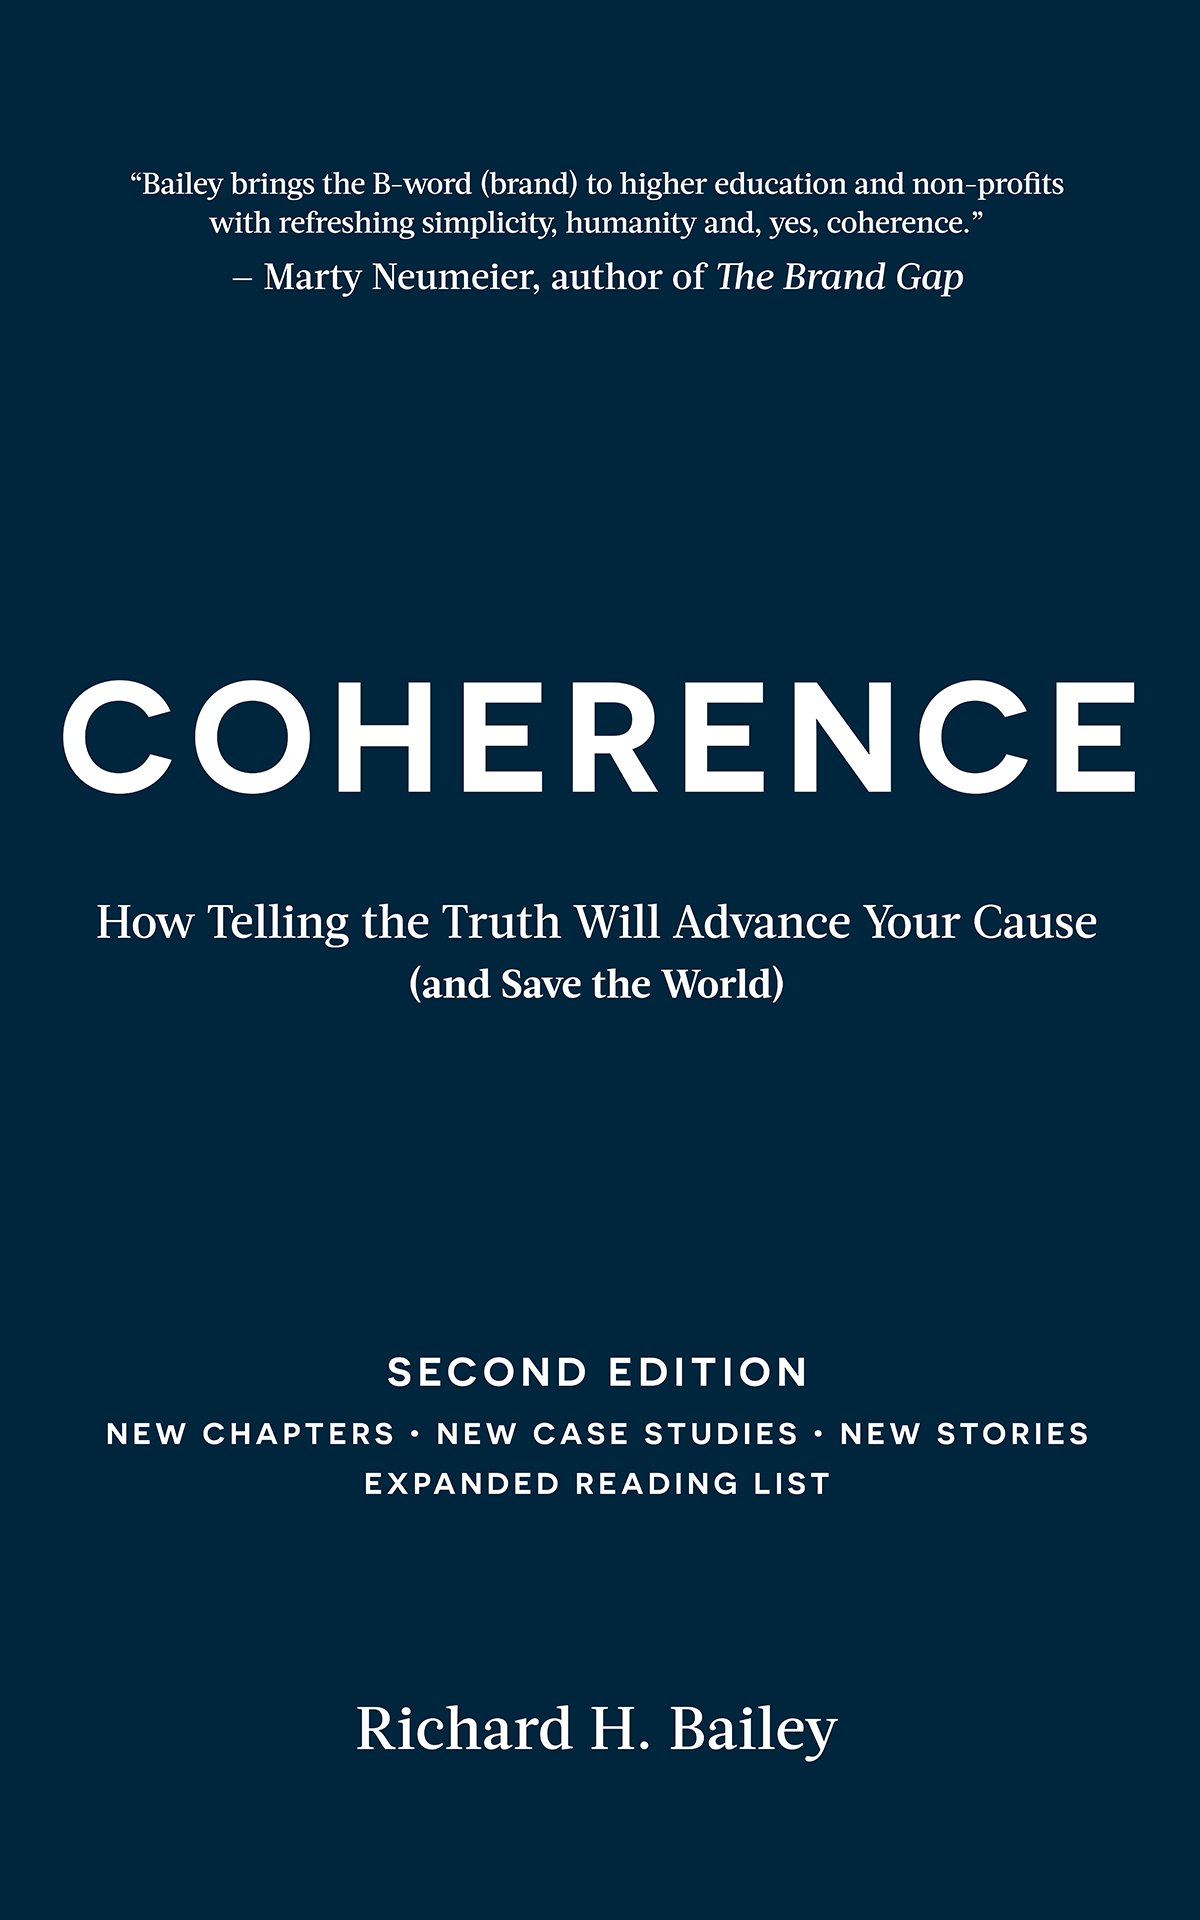 Coherence the Book, 2nd Edition